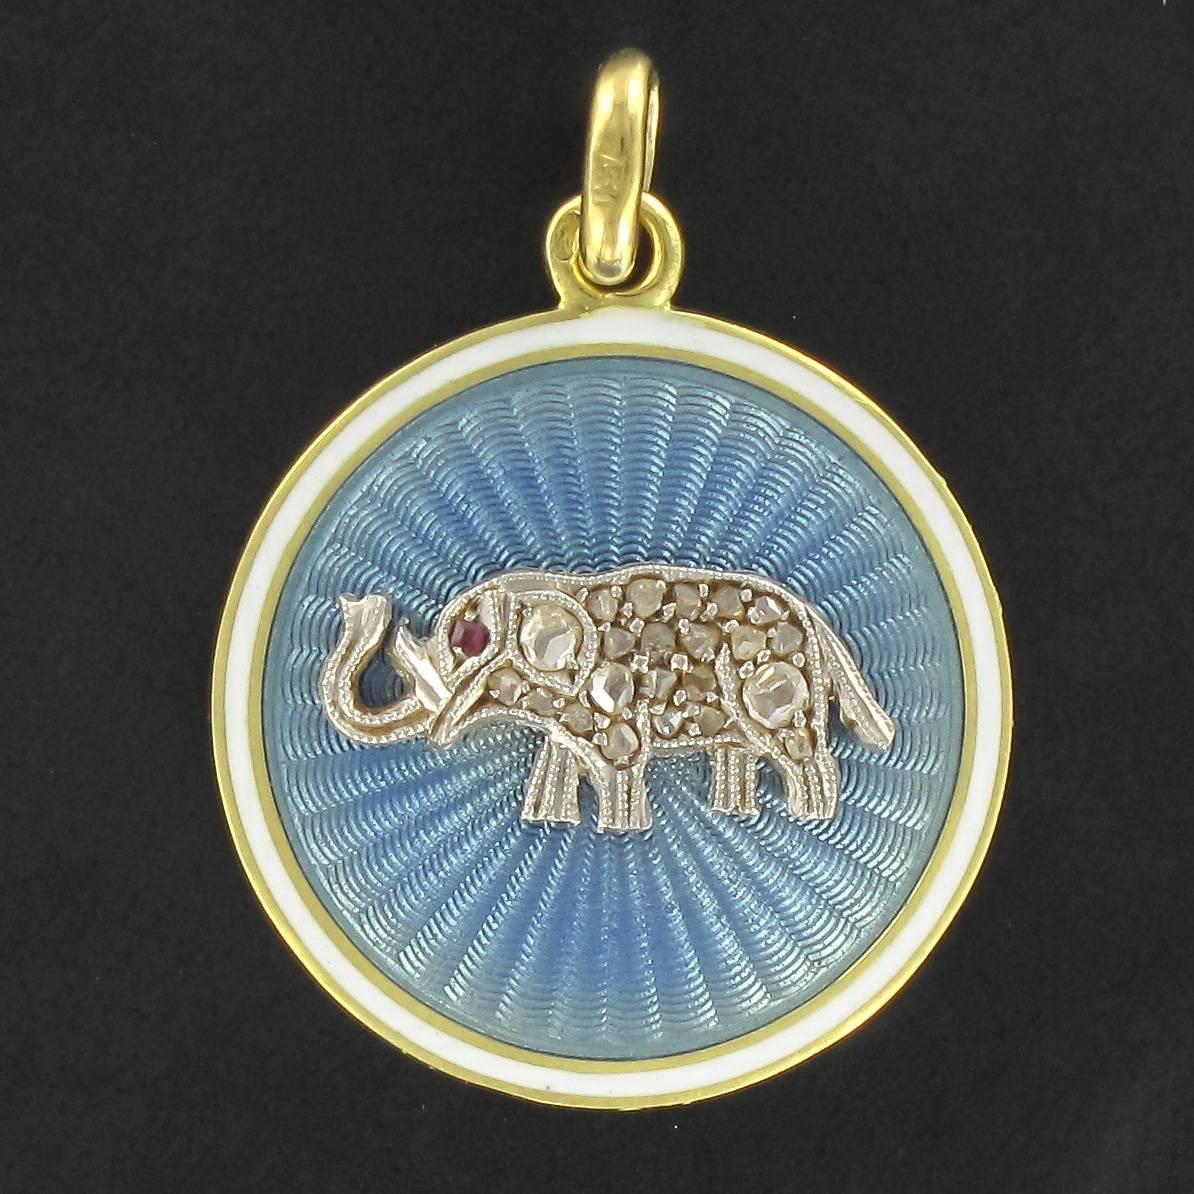 Medal in 18 carat yellow gold, eagle head hallmark. 
This delightful rare antique medallion features an elephant theme design in blue and white enamel set with rose cut diamonds. The back is smooth. 
This magnificent antique pendant is in excellent